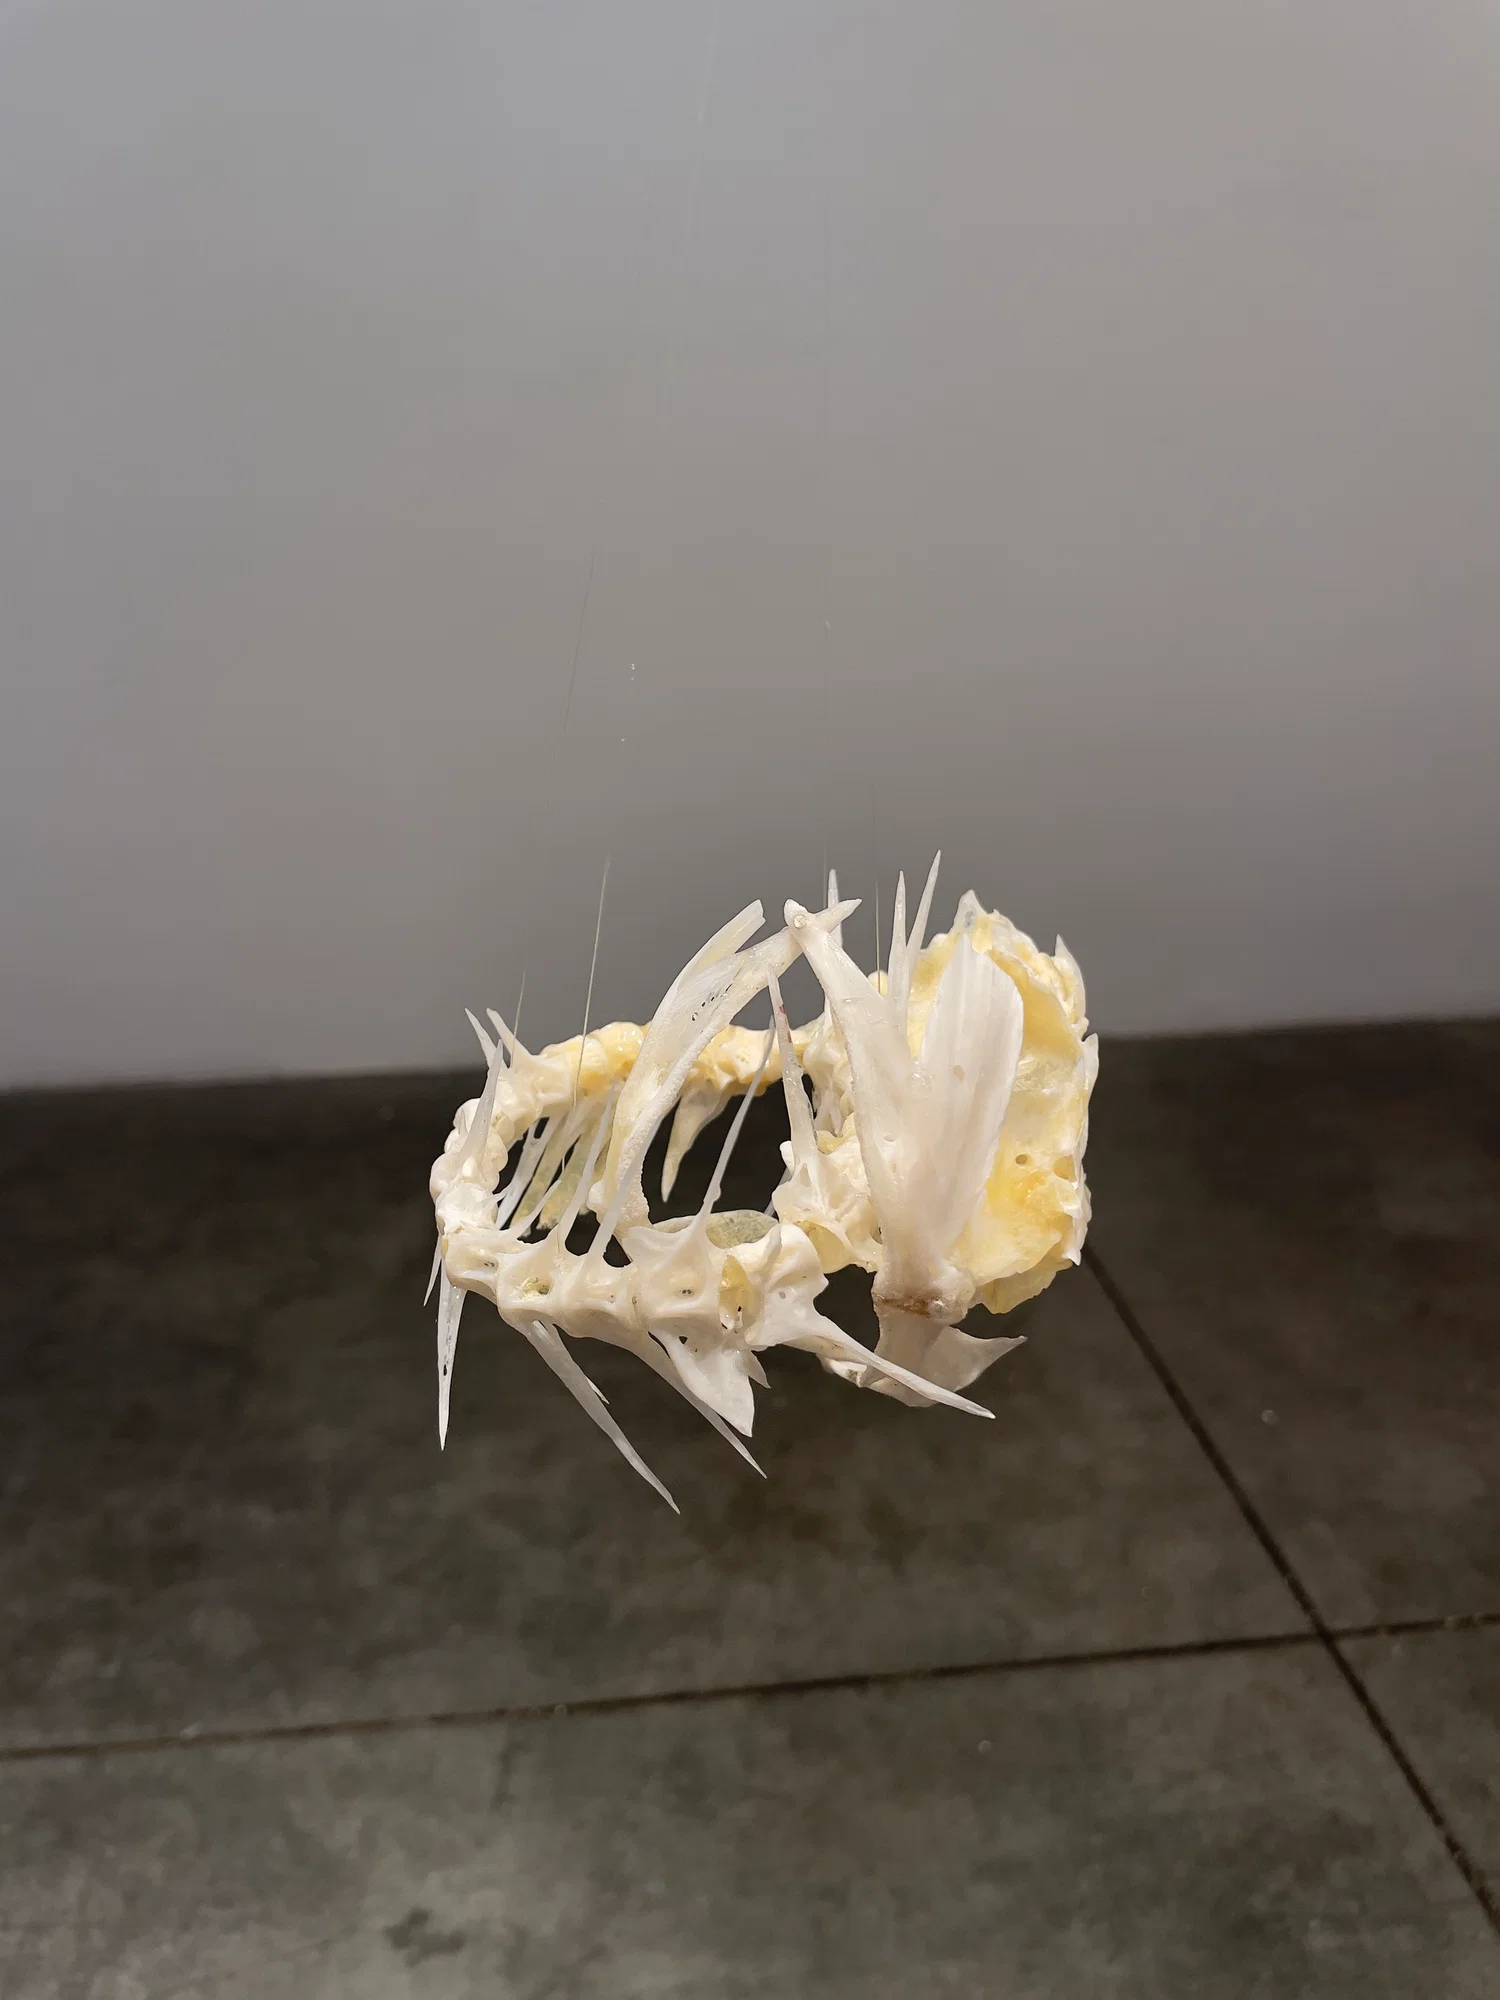 Fish bones in the shape of an ouroboros floating in a gallery spaceT